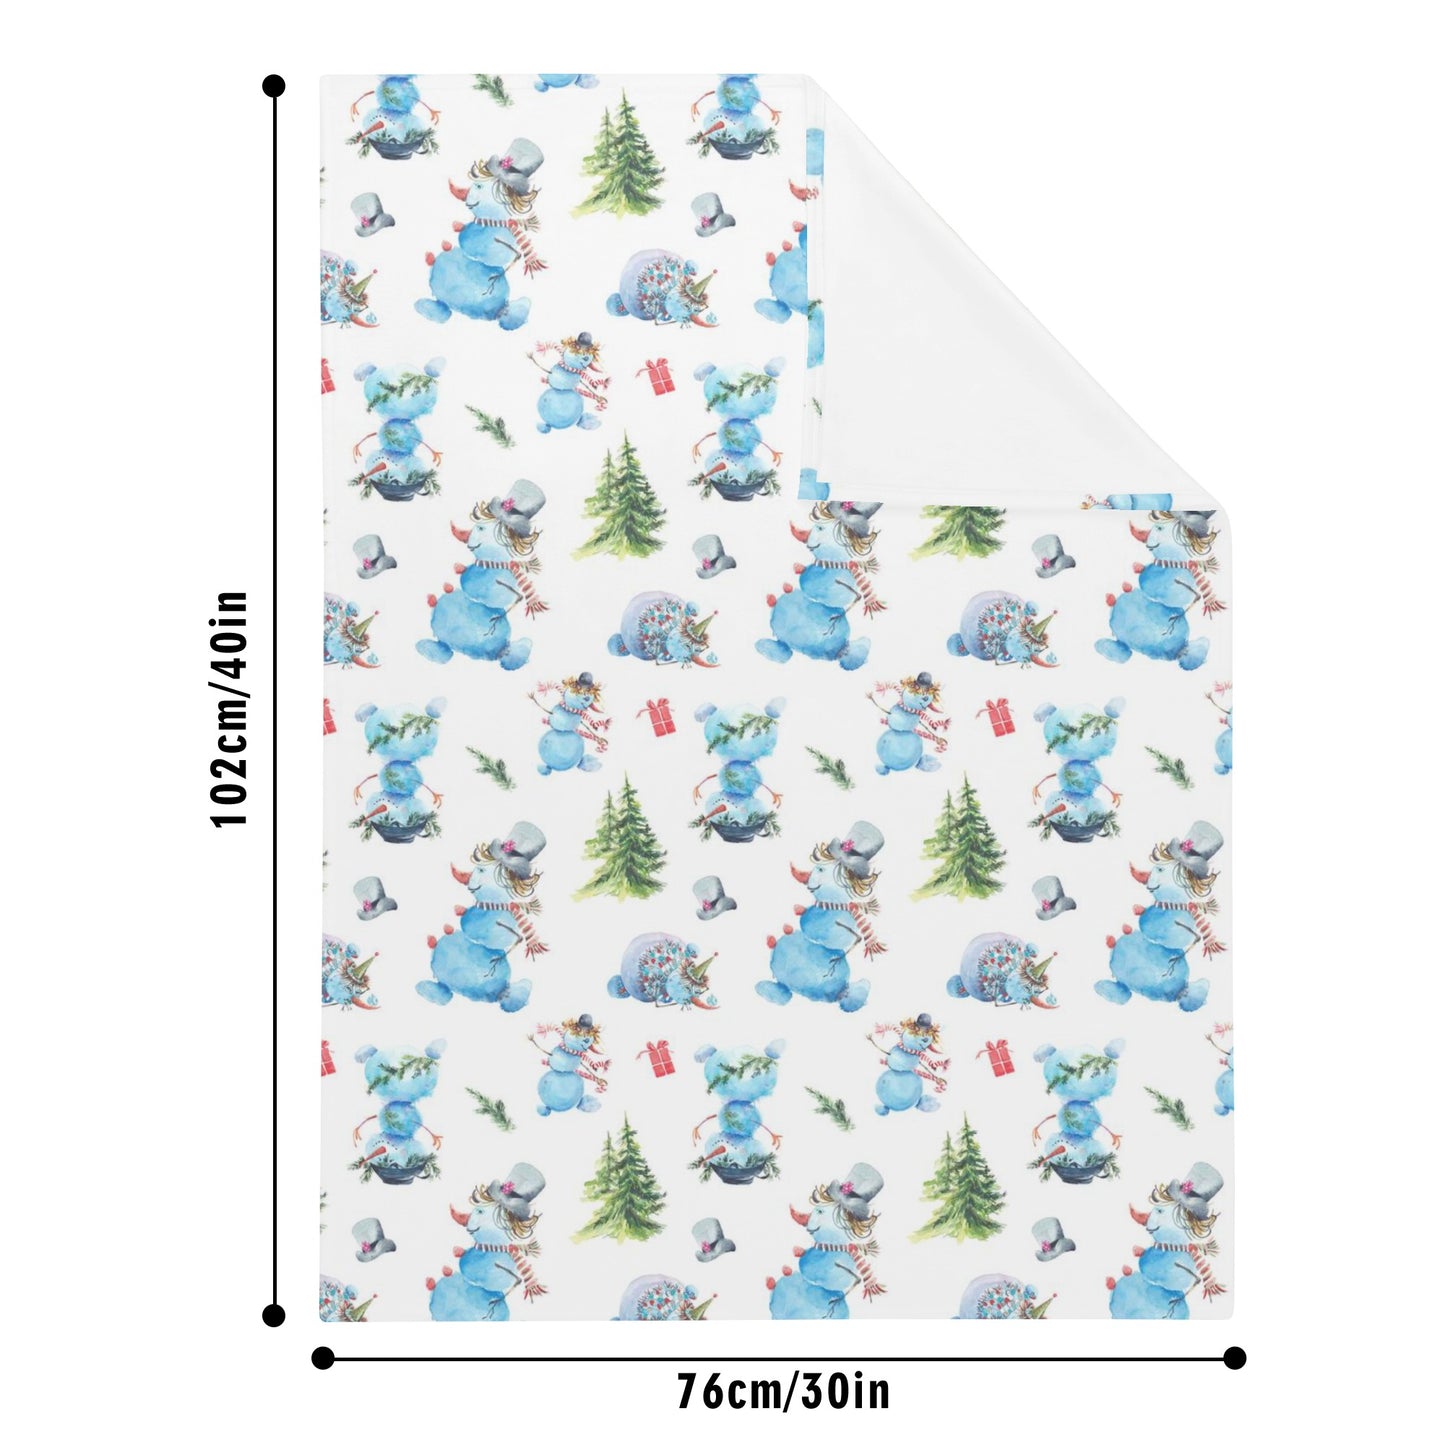 Frosty The Snowman Soft Flannel Breathable Blanket